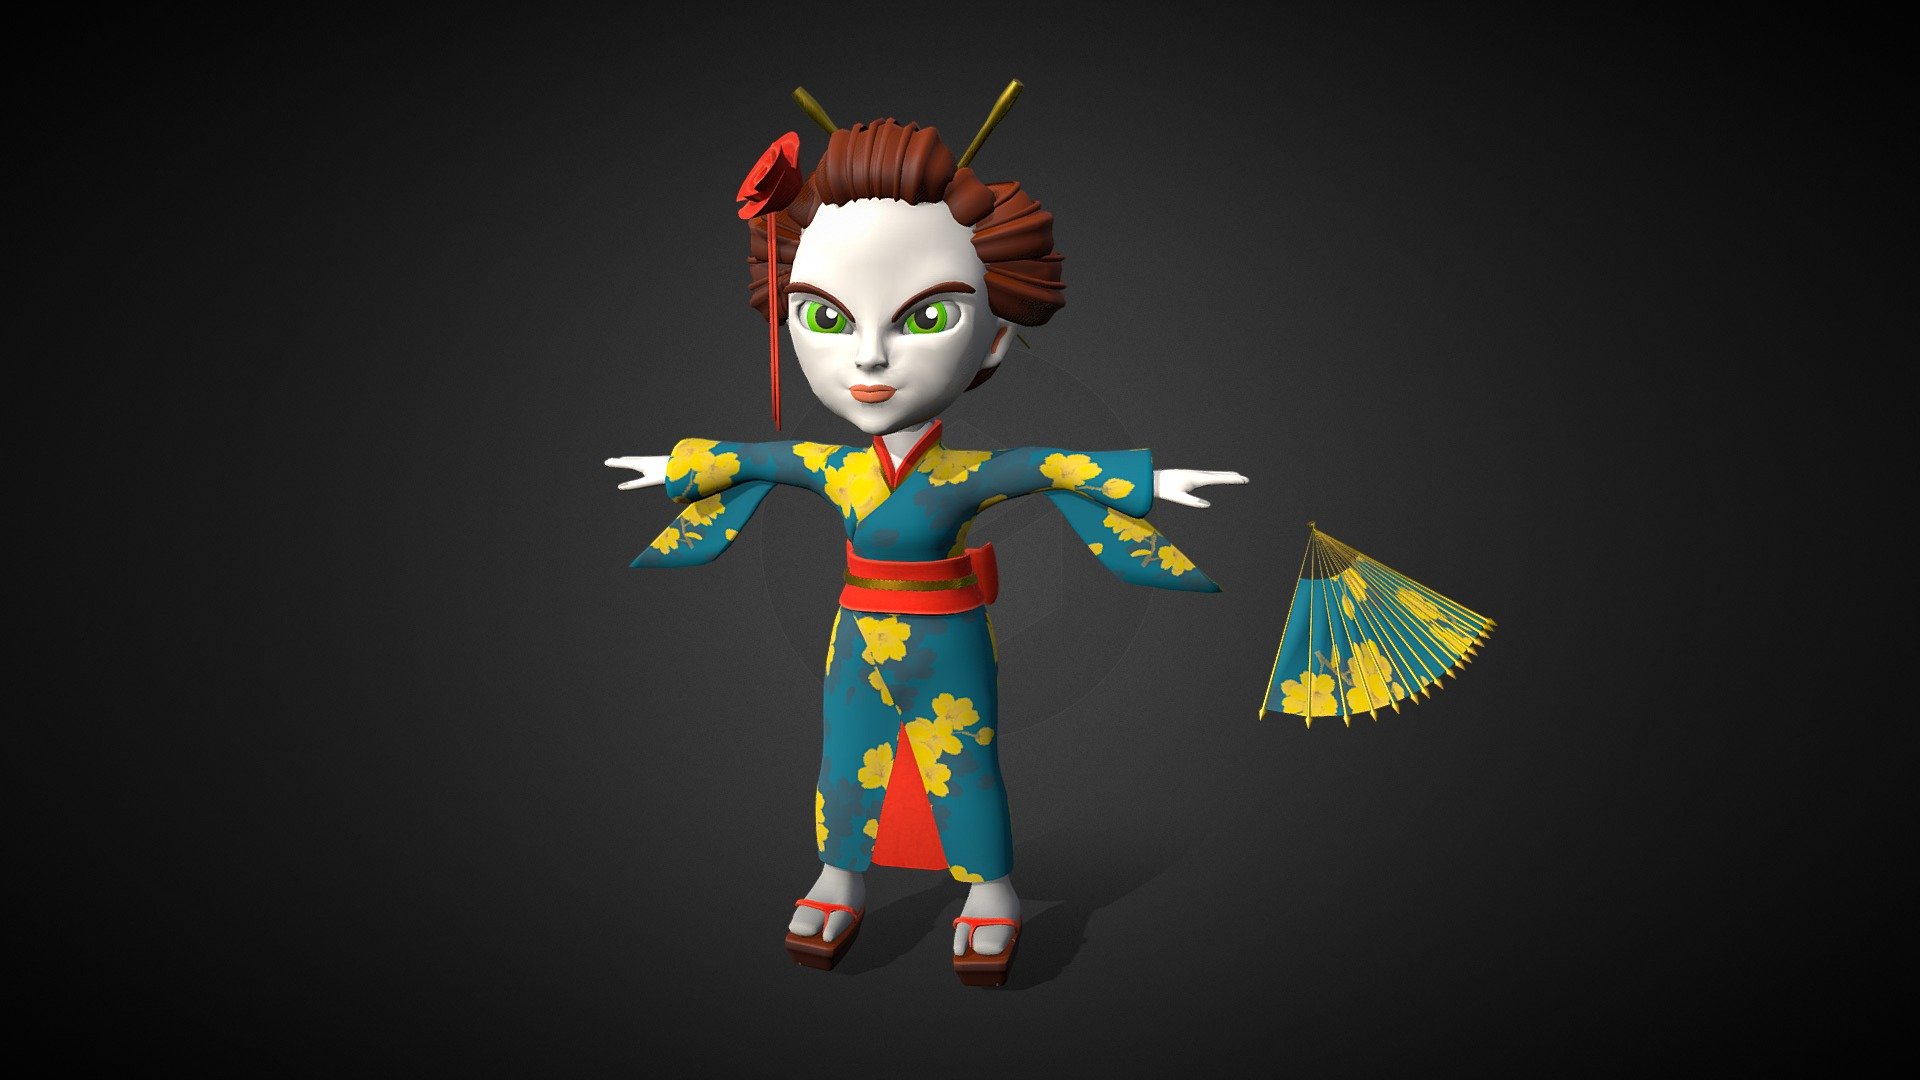 I designed and modeled this character as part of a character pack for a mobile game project. I used Blender and Quixel Mixer - Geisha - 3D model by Miray Naz Kara (@m.nazkara) 3d model